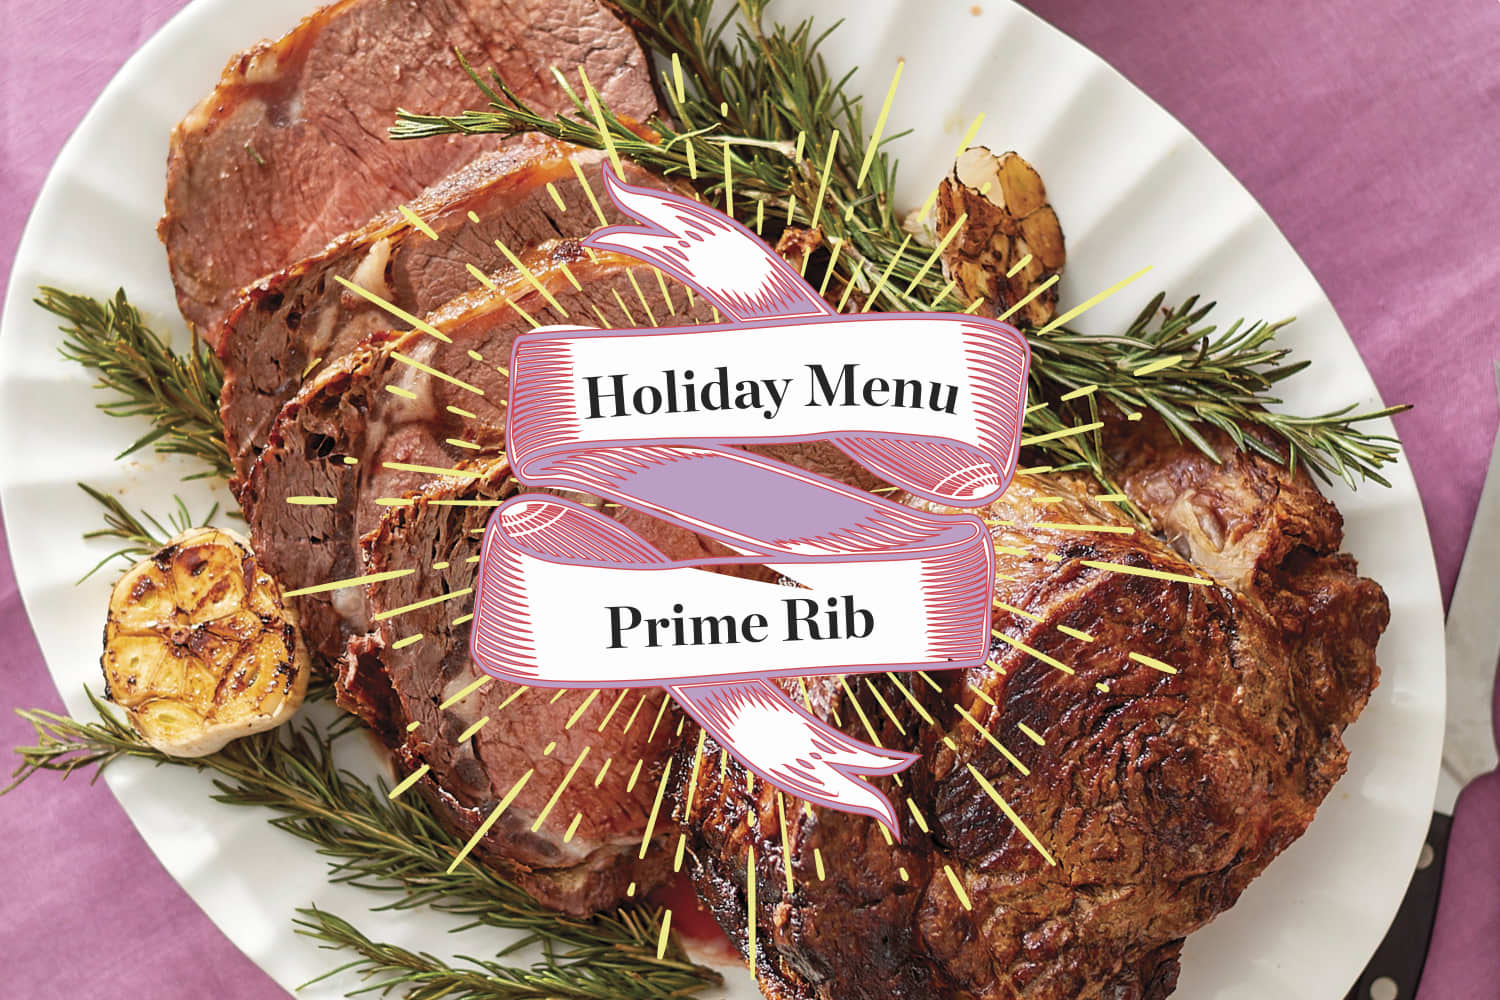 Prime Rib For Holiday Meal : Serve a holiday meal they'll never forget ...